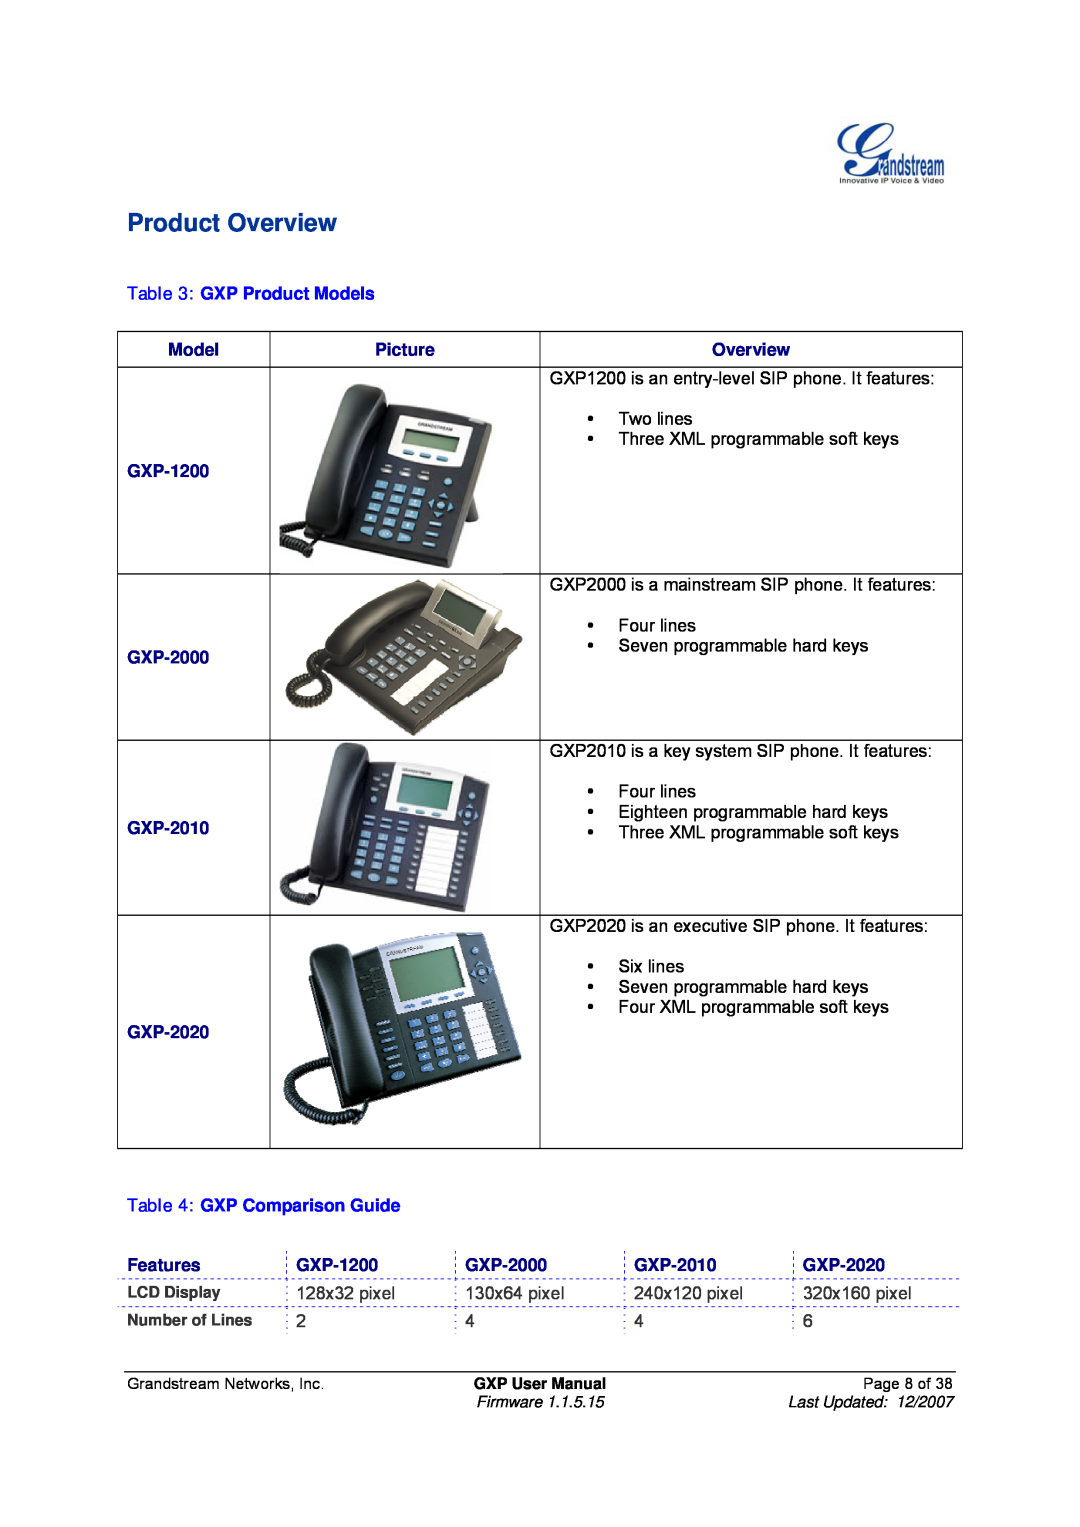 Grandstream Networks GXP-2010 manual Product Overview, Model, Picture, GXP-1200, GXP-2000, GXP-2020, Features 